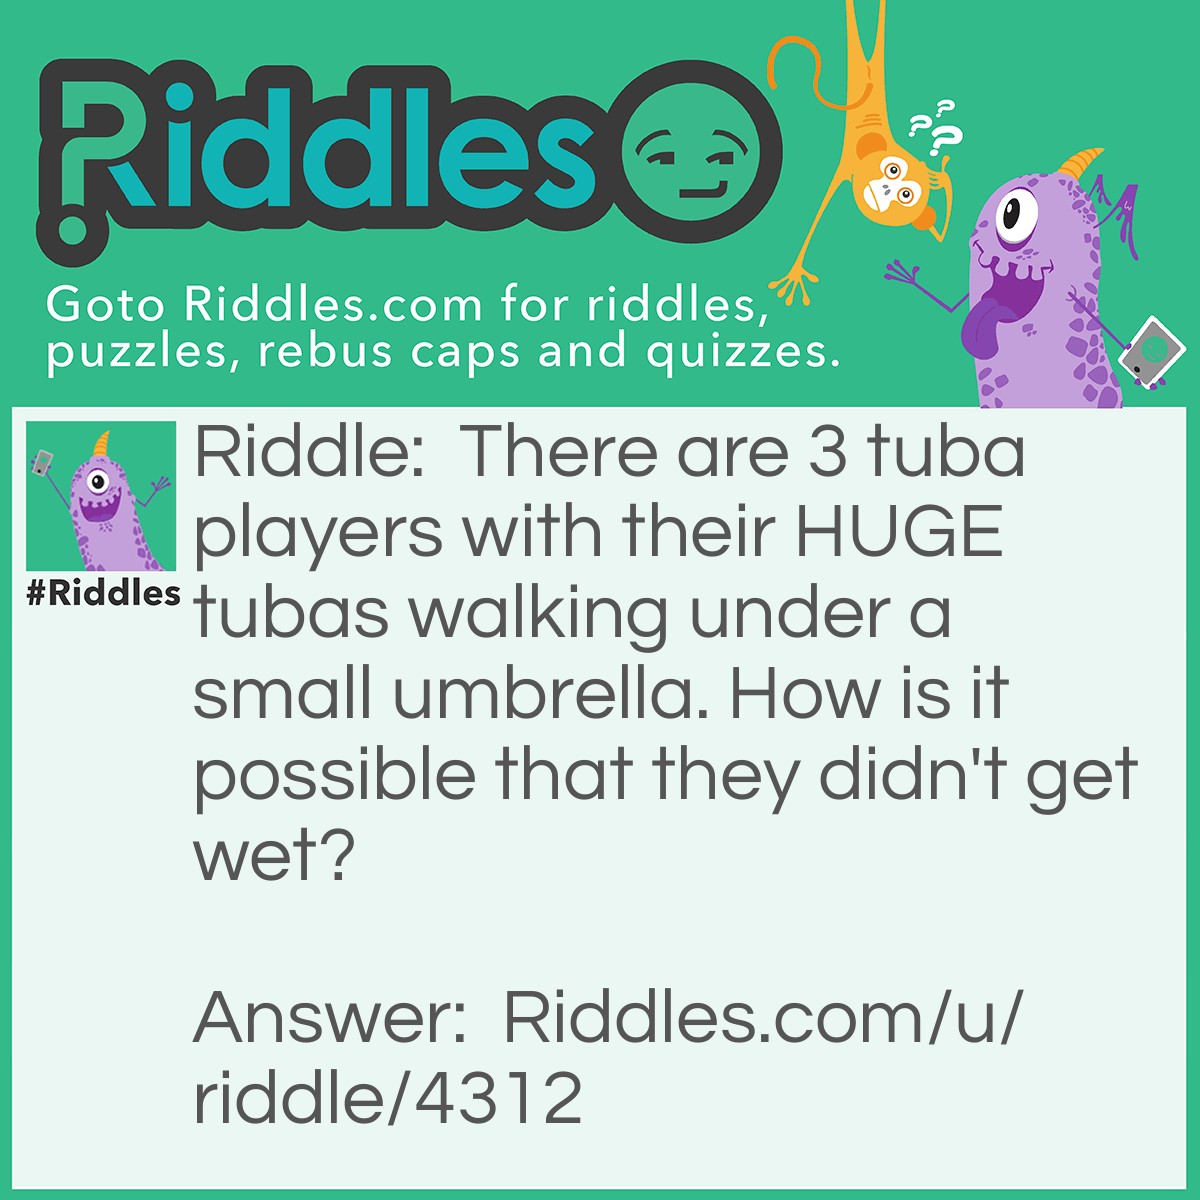 Riddle: There are 3 tuba players with their HUGE tubas walking under a small umbrella. How is it possible that they didn't get wet? Answer: It wasn't raining ☂.